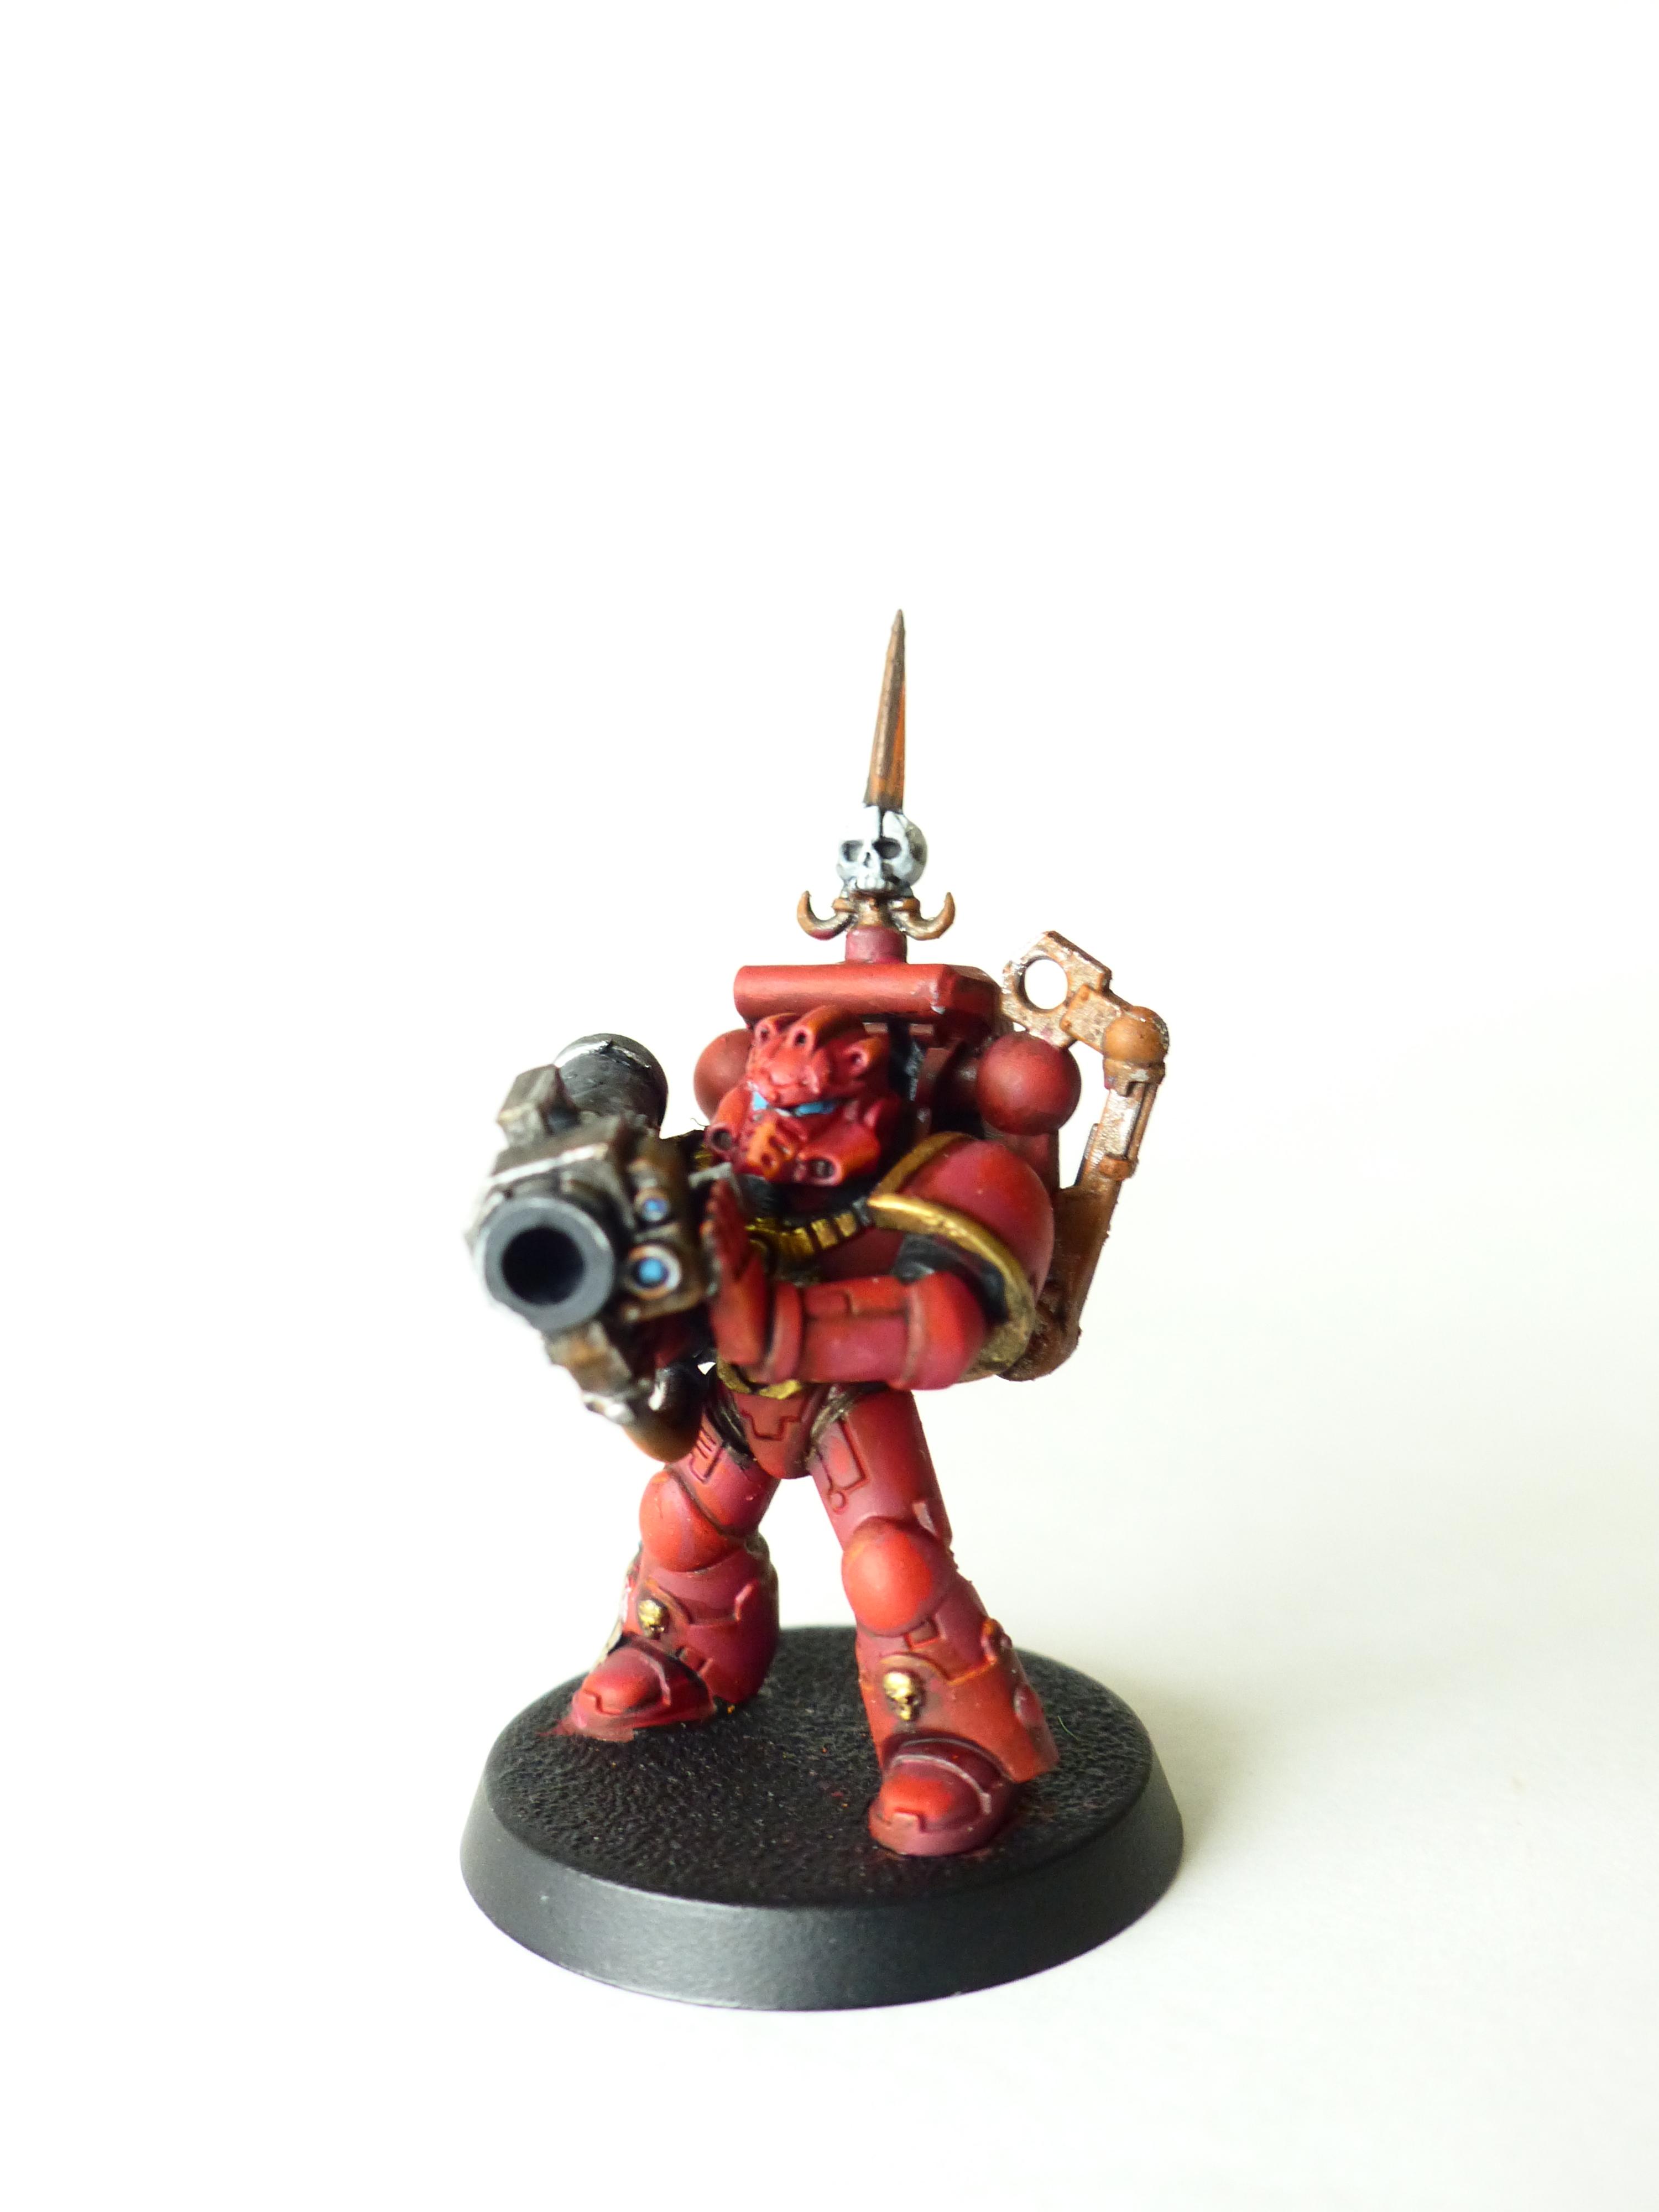 Chaos, Chaos Space Marines, Crimson Slaughter, Havocs, Heavy Weapon, Lascannon, Missile Launcher, Plasma Cannon, Space Marines